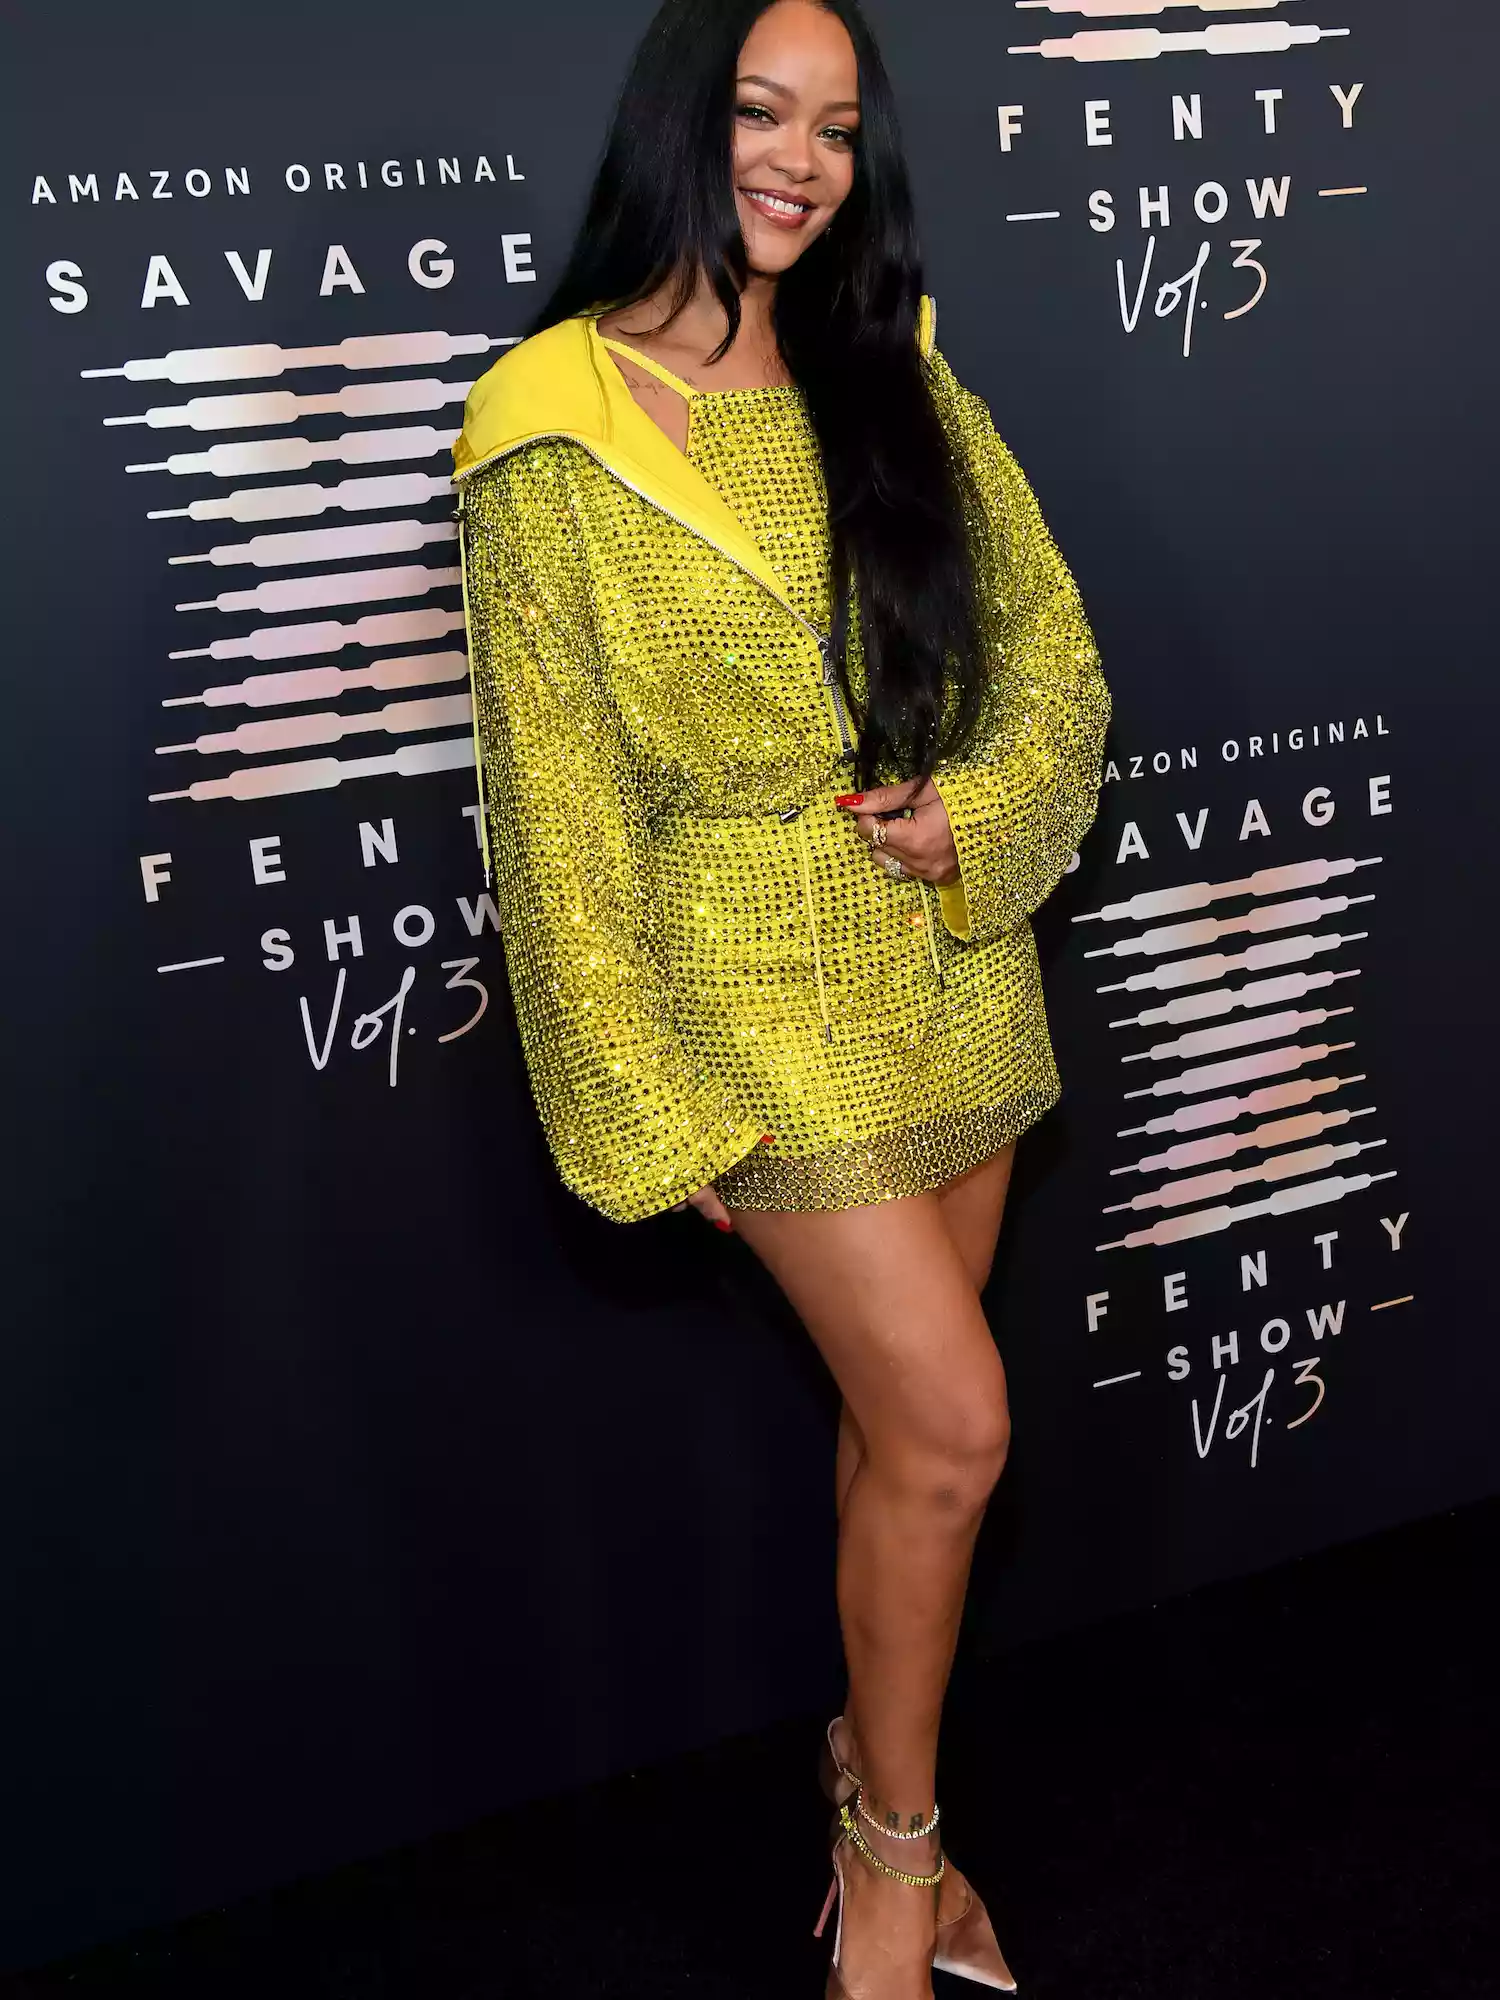 Rihanna wears a yellow sequined look and pointed-toe heels to the Savage x Fenty Show Vol. 3